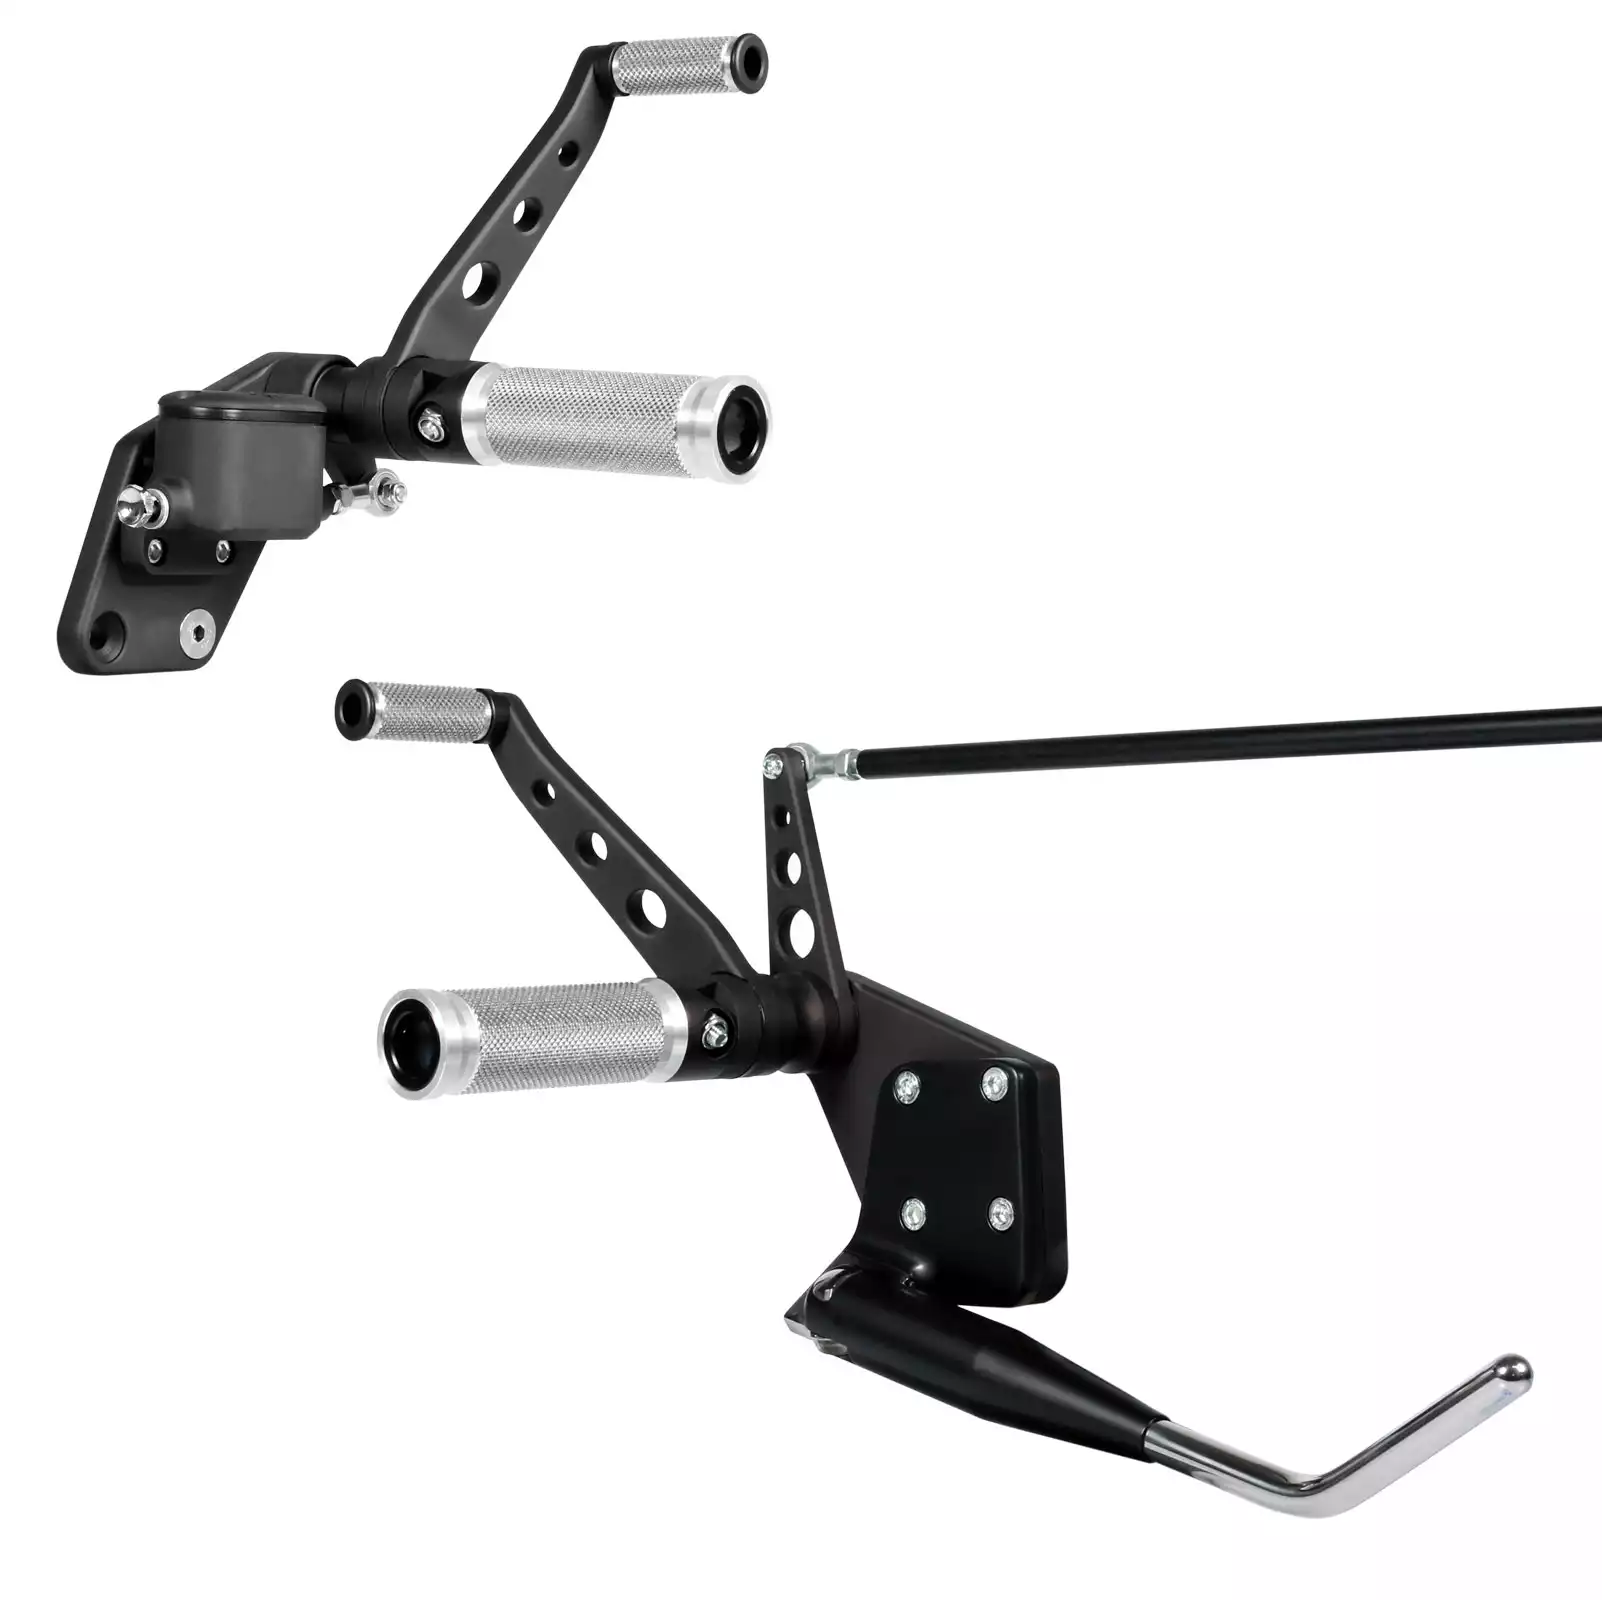 Thunderbike Base Aluminium Forward Control Kit With Side Stand in Black Finish For 2000-2017 Softail (Excluding FXSE) Models (31-72-251)